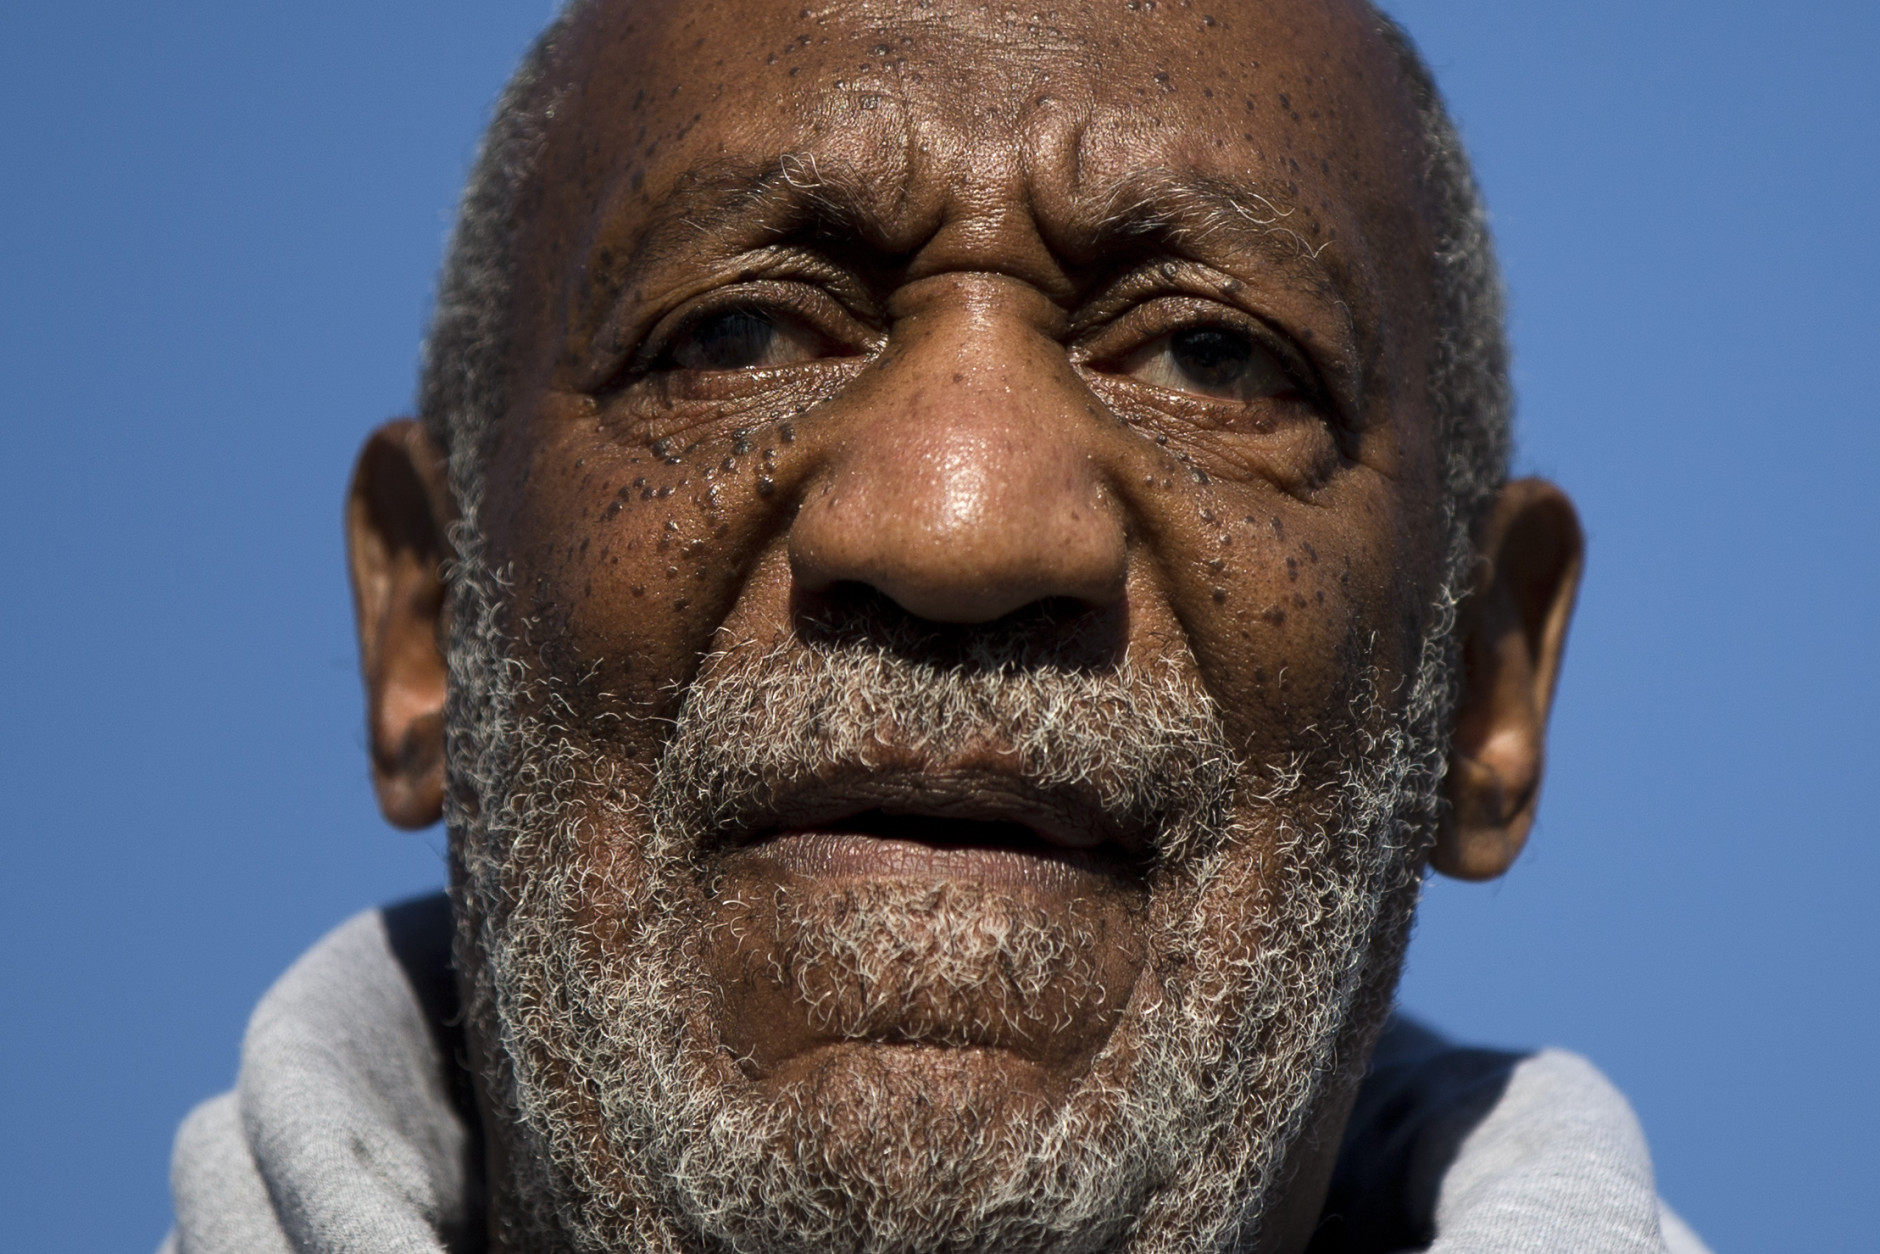 FOR USE AS DESIRED, YEAR END PHOTOS - FILE - Entertainer and Navy veteran Bill Cosby speaks during a Veterans Day ceremony, Tuesday, Nov. 11, 2014, at the The All Wars Memorial to Colored Soldiers and Sailors in Philadelphia. (AP Photo/Matt Rourke, File)